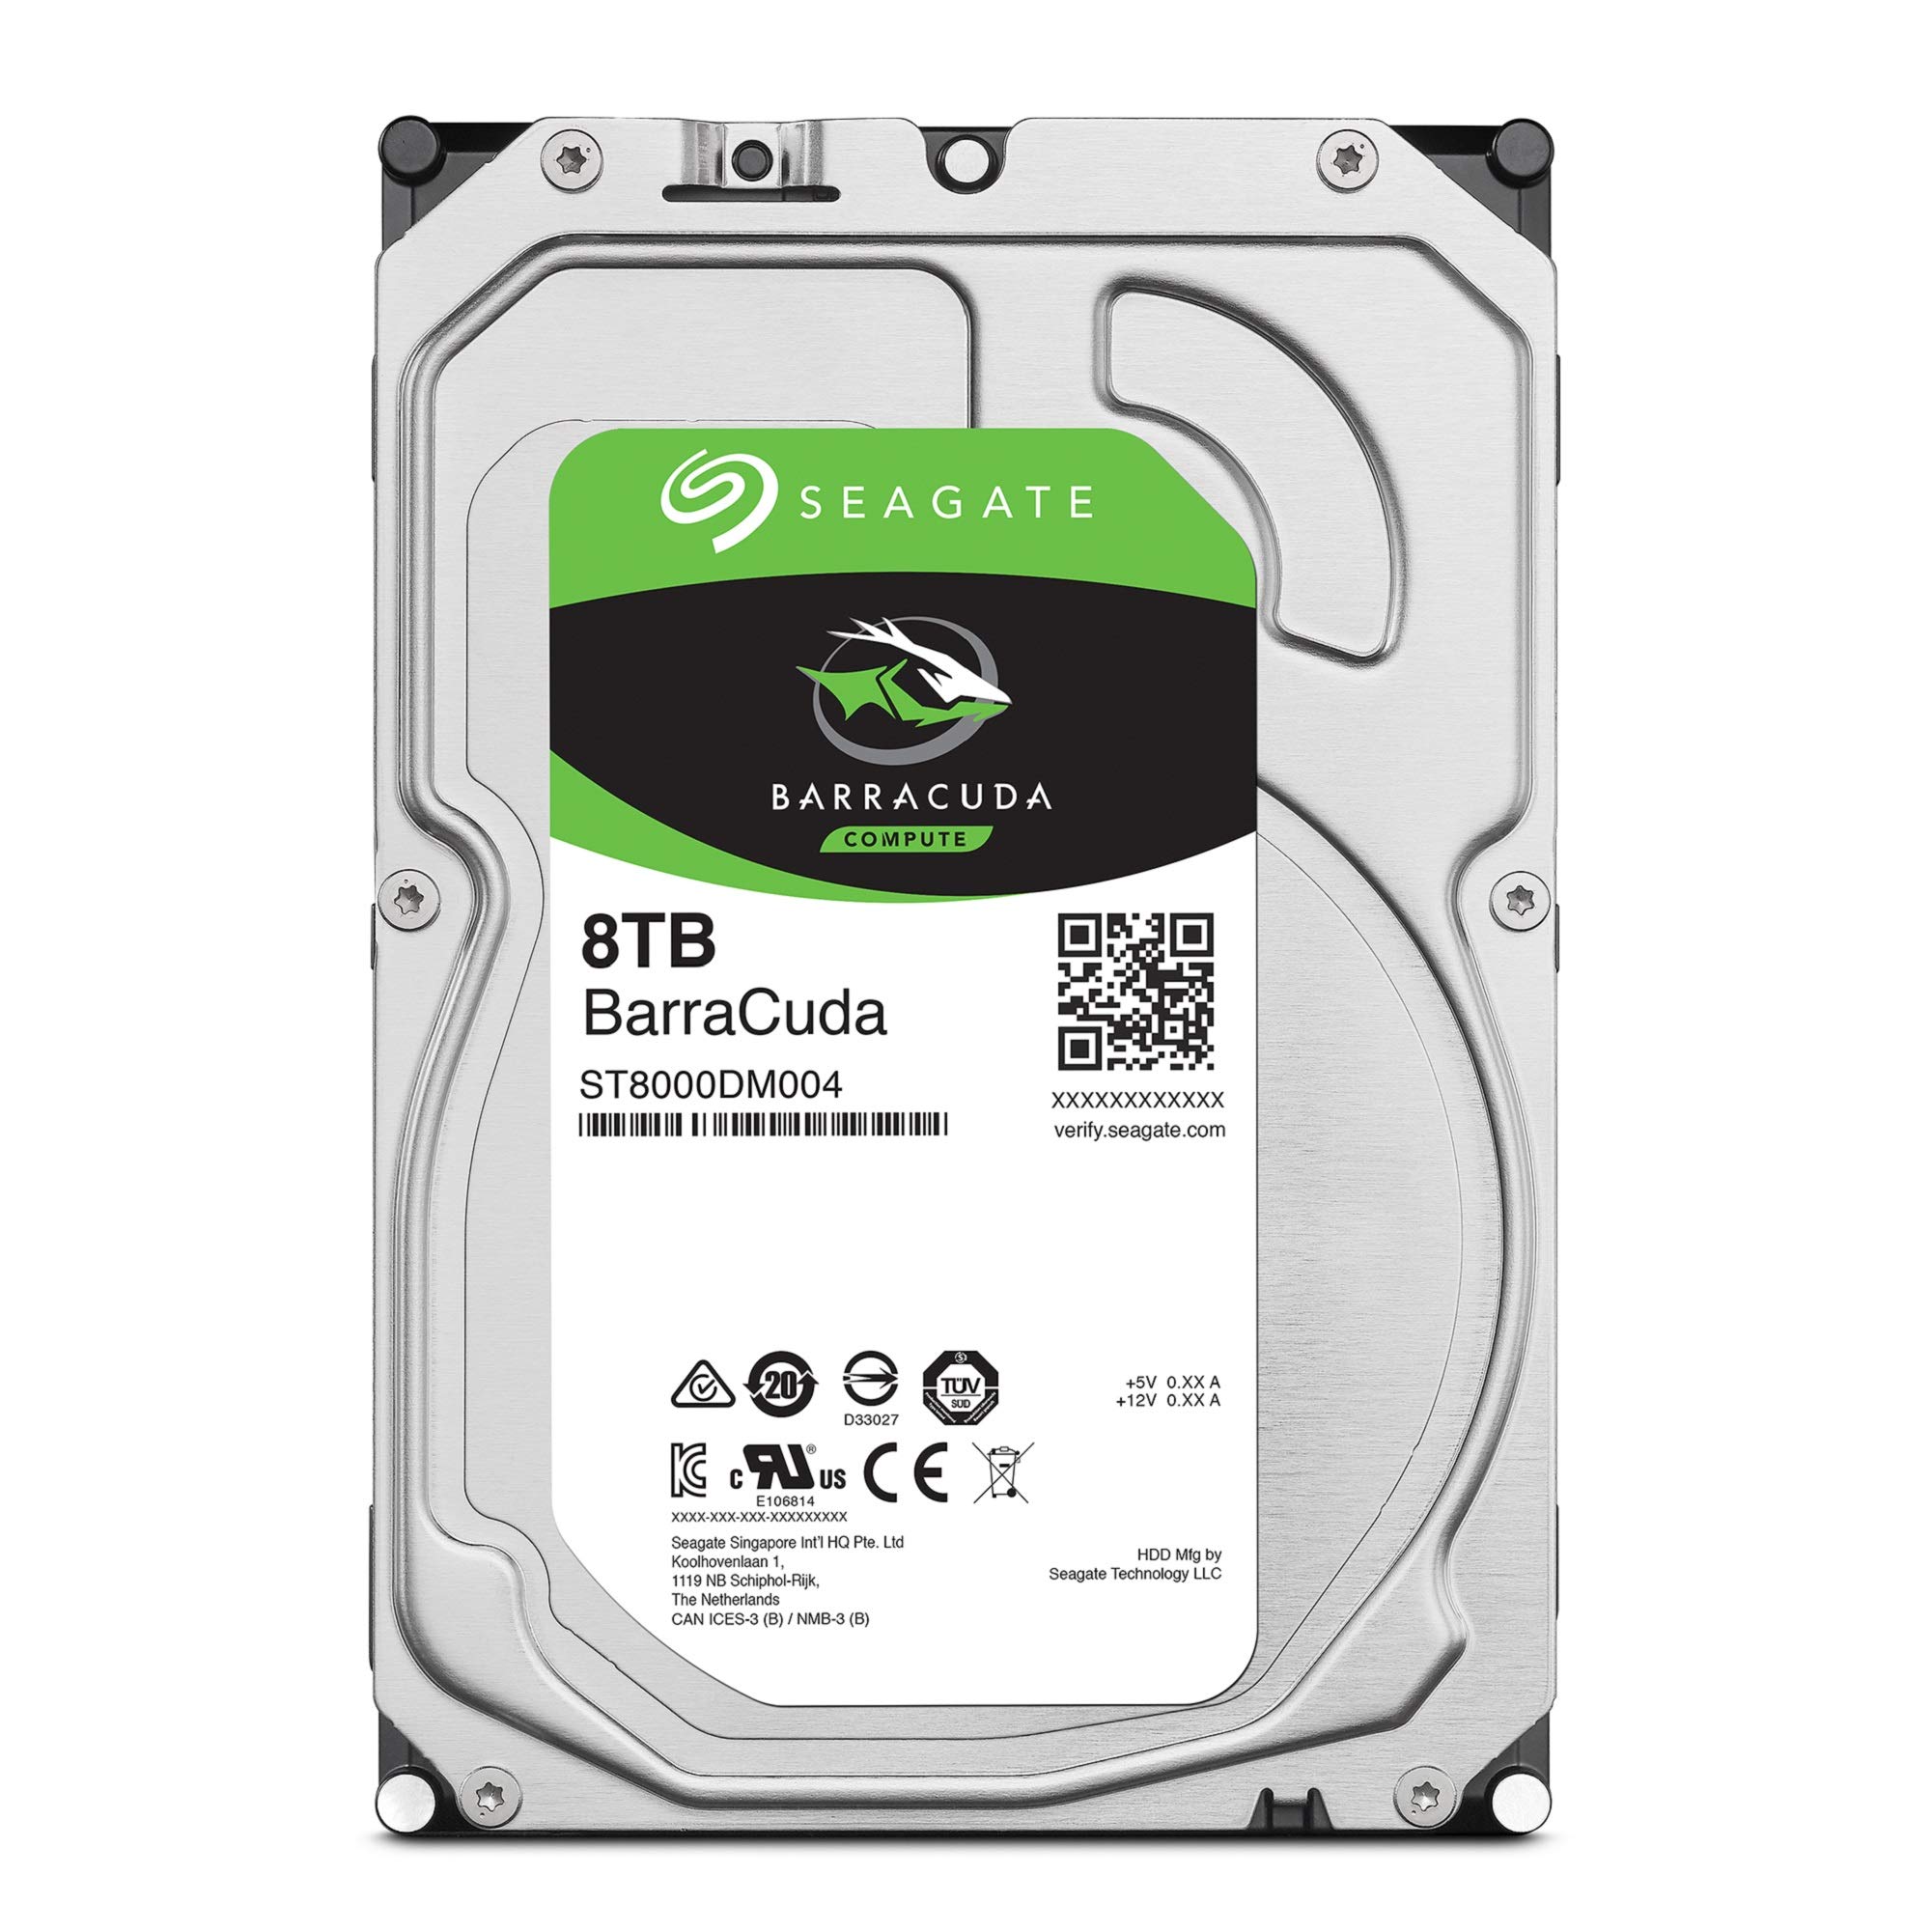 Seagate ST8000DM008 BarraCuda 8TB Internal Hard Drive HDD – 3.5 Inch Sata 6 Gb/s 5400 RPM 256MB Cache for Computer Desktop PC – Frustration Free Packaging (ST8000DM004)